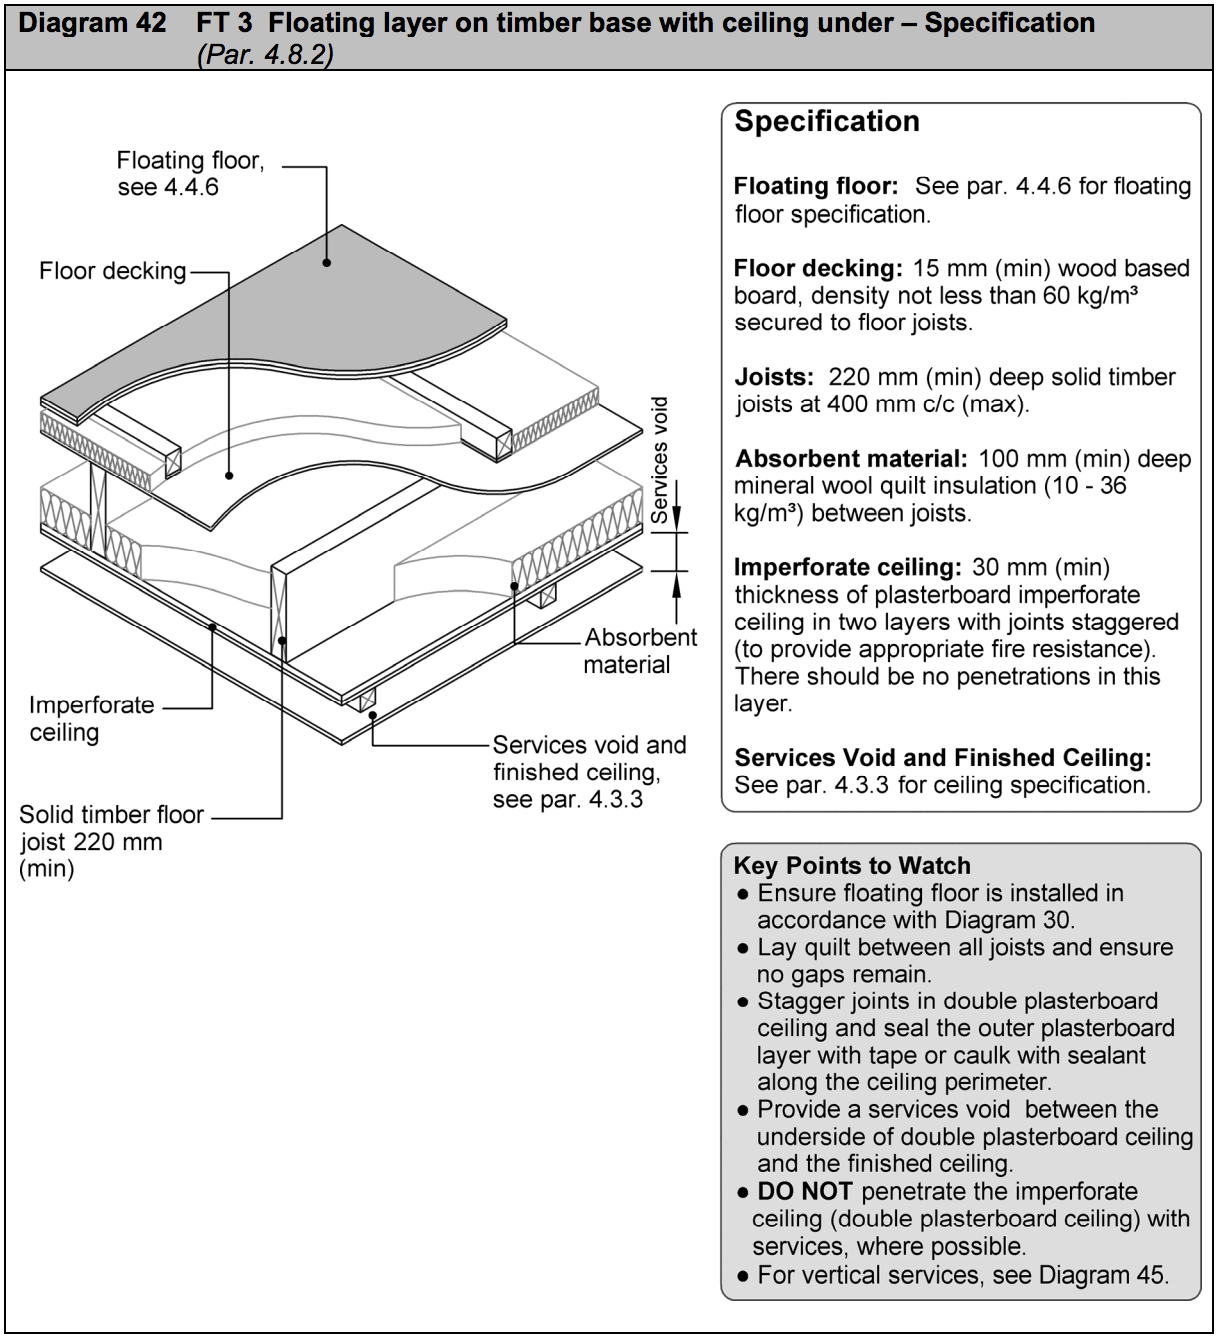 Diagram HE42 - FT 3 Floating layer on timber base with ceiling under - specification - Extract from TGD E